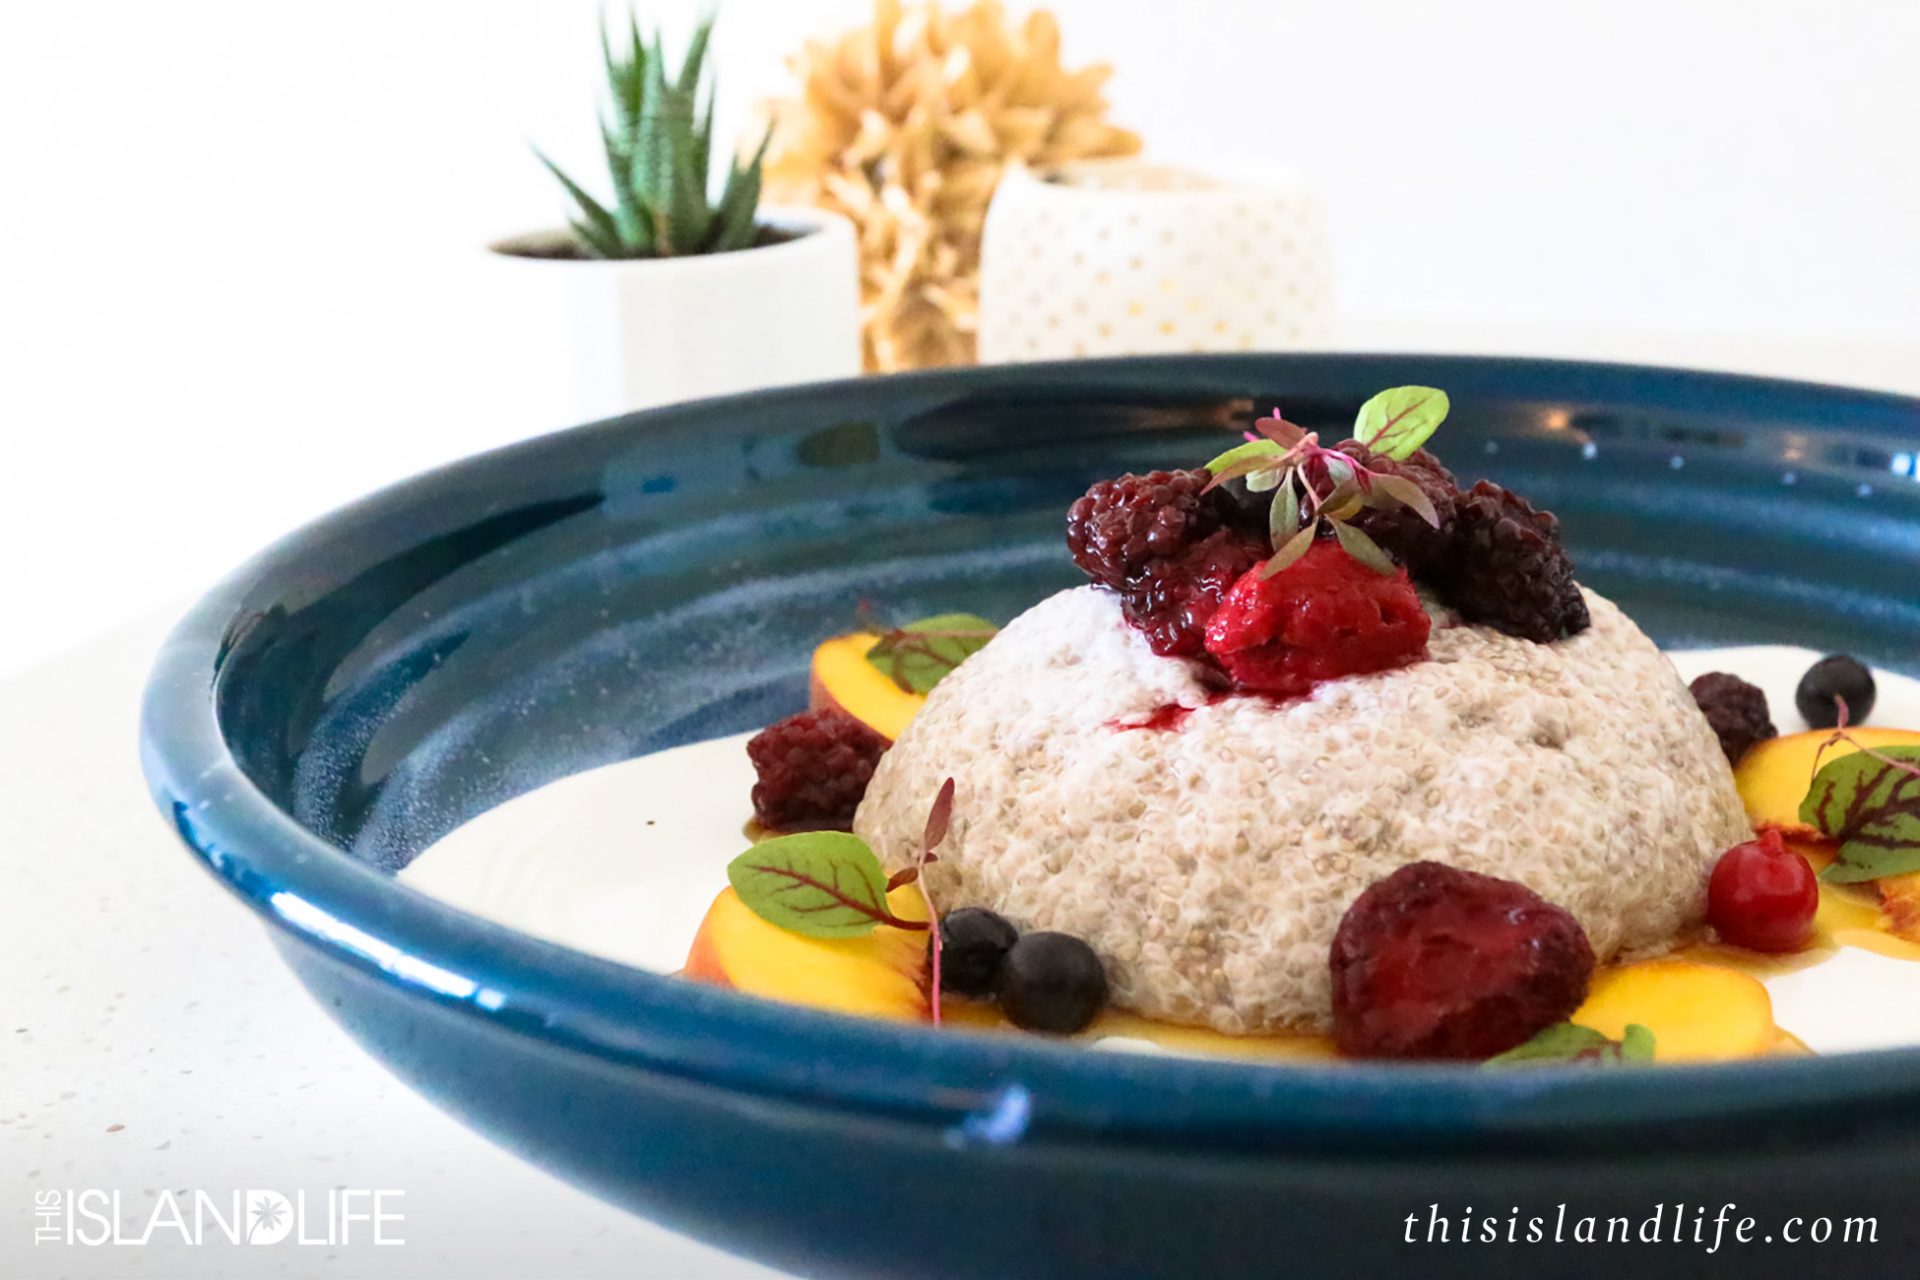 This Island Life | HOW TO MAKE COCONUT-SOAKED CHIA SEED PUDDING